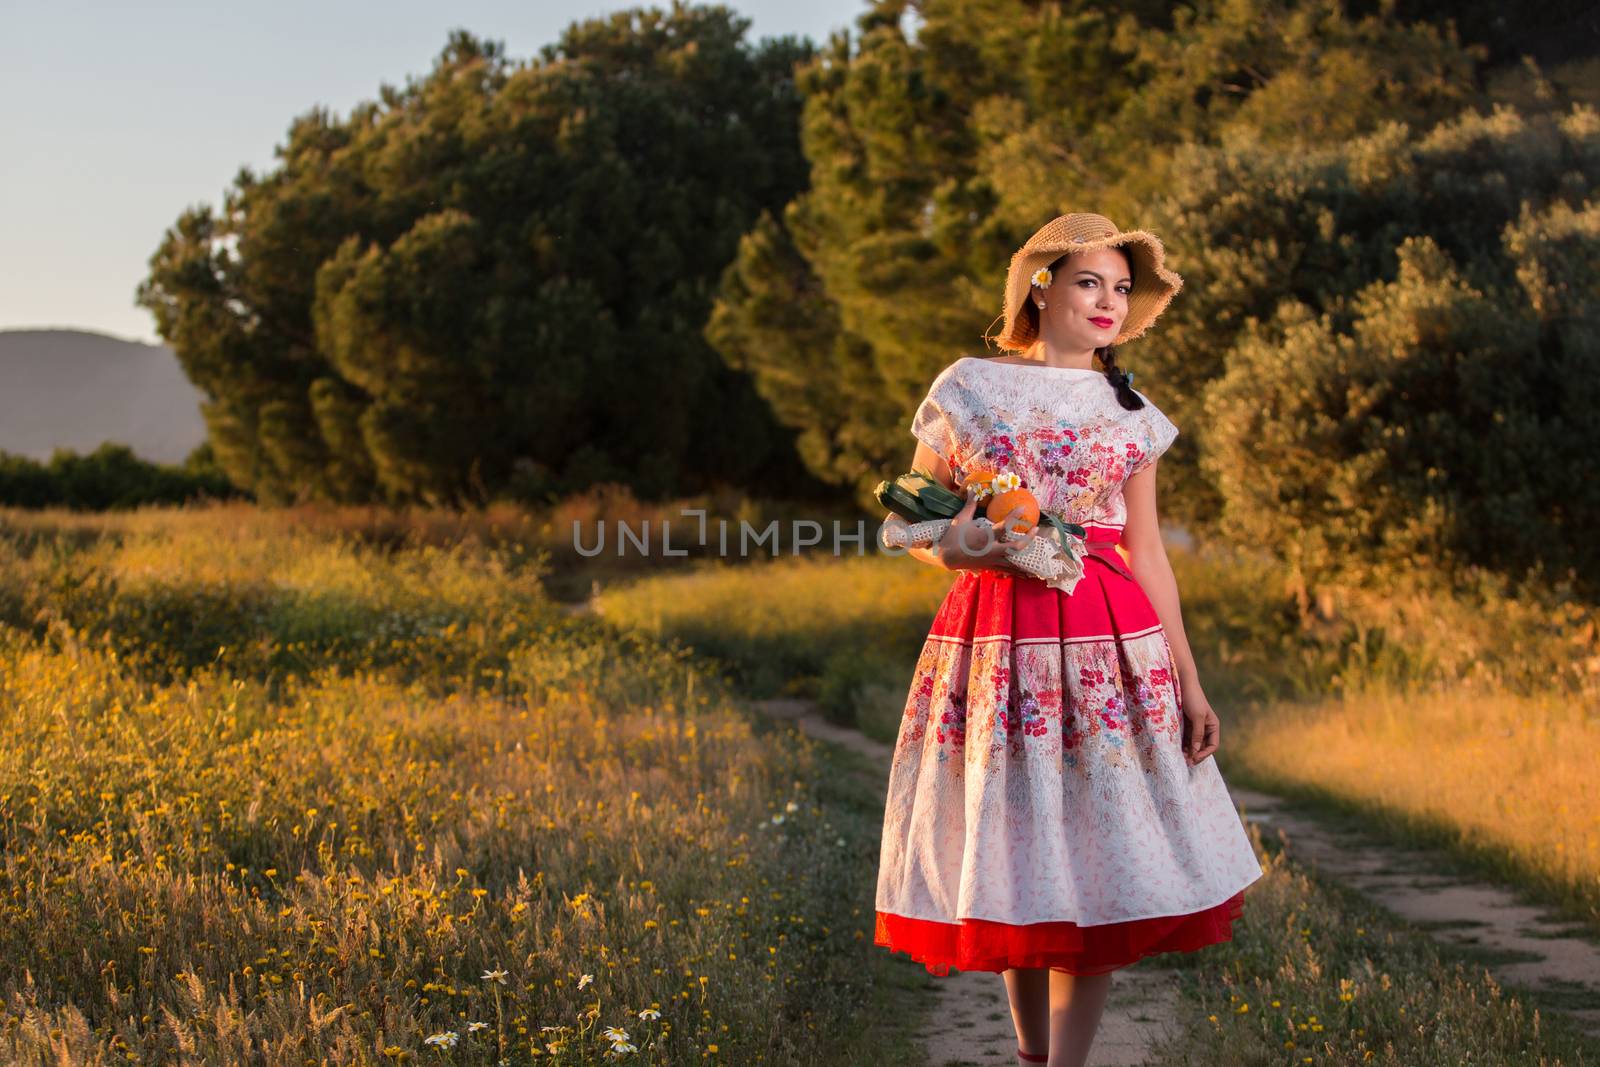 Vintage girl on the countryside by membio